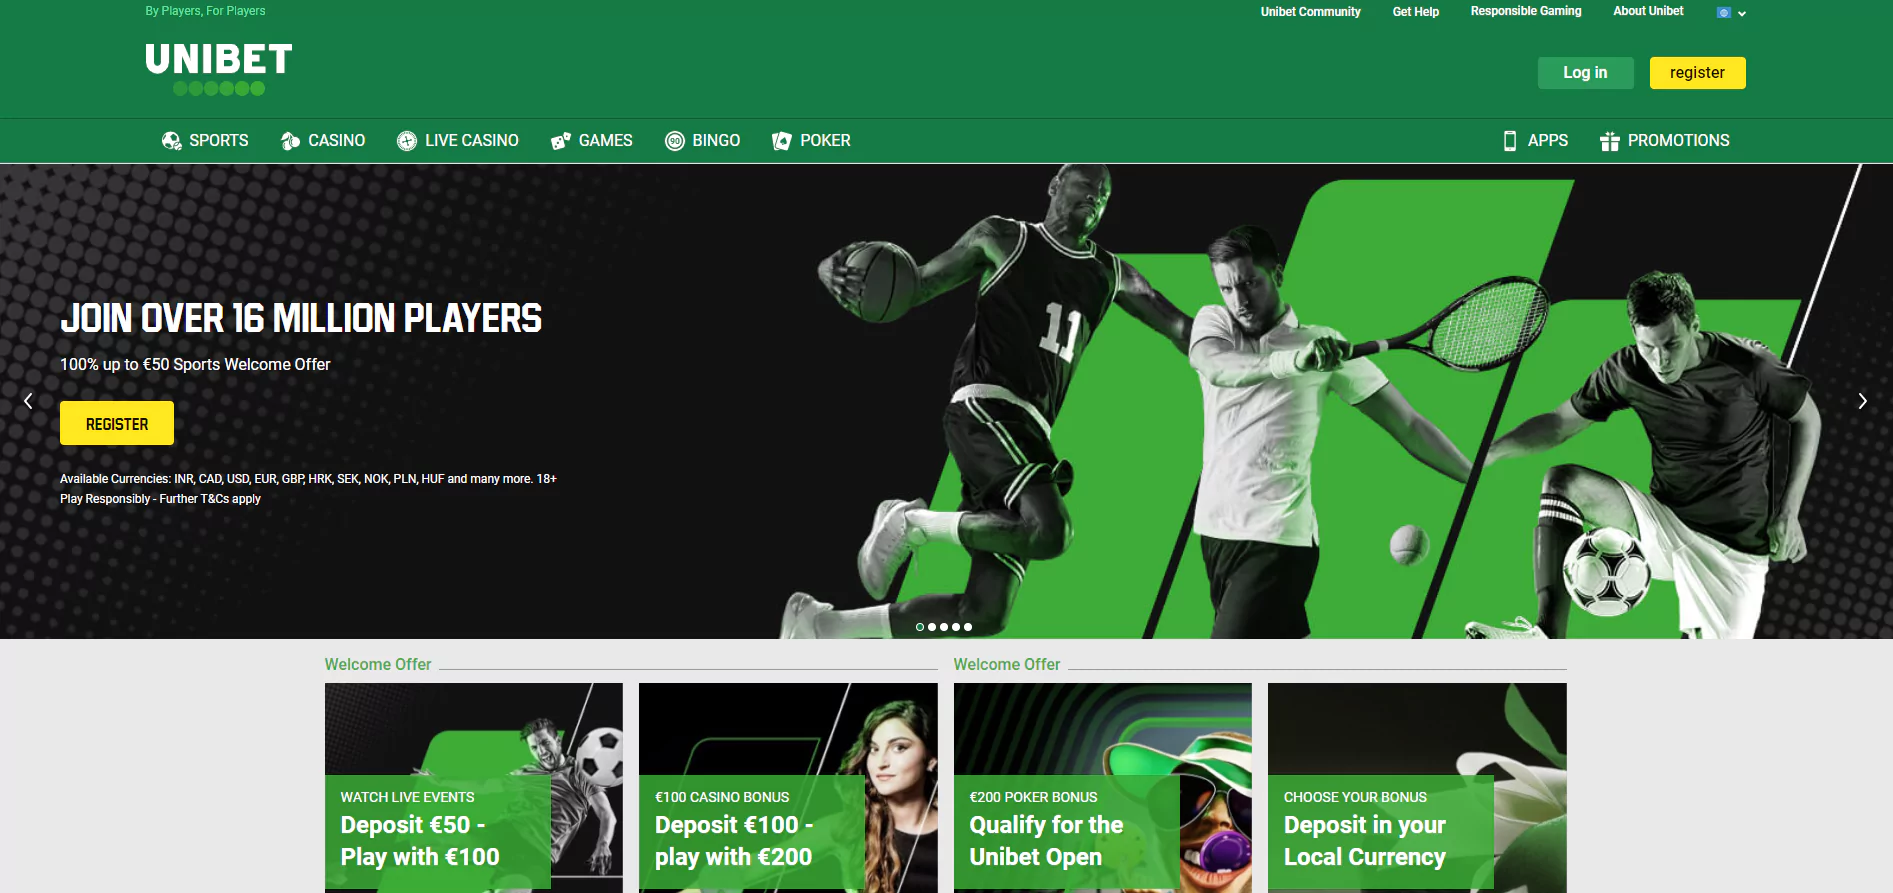 Main menu of the Unibet bookmaker page